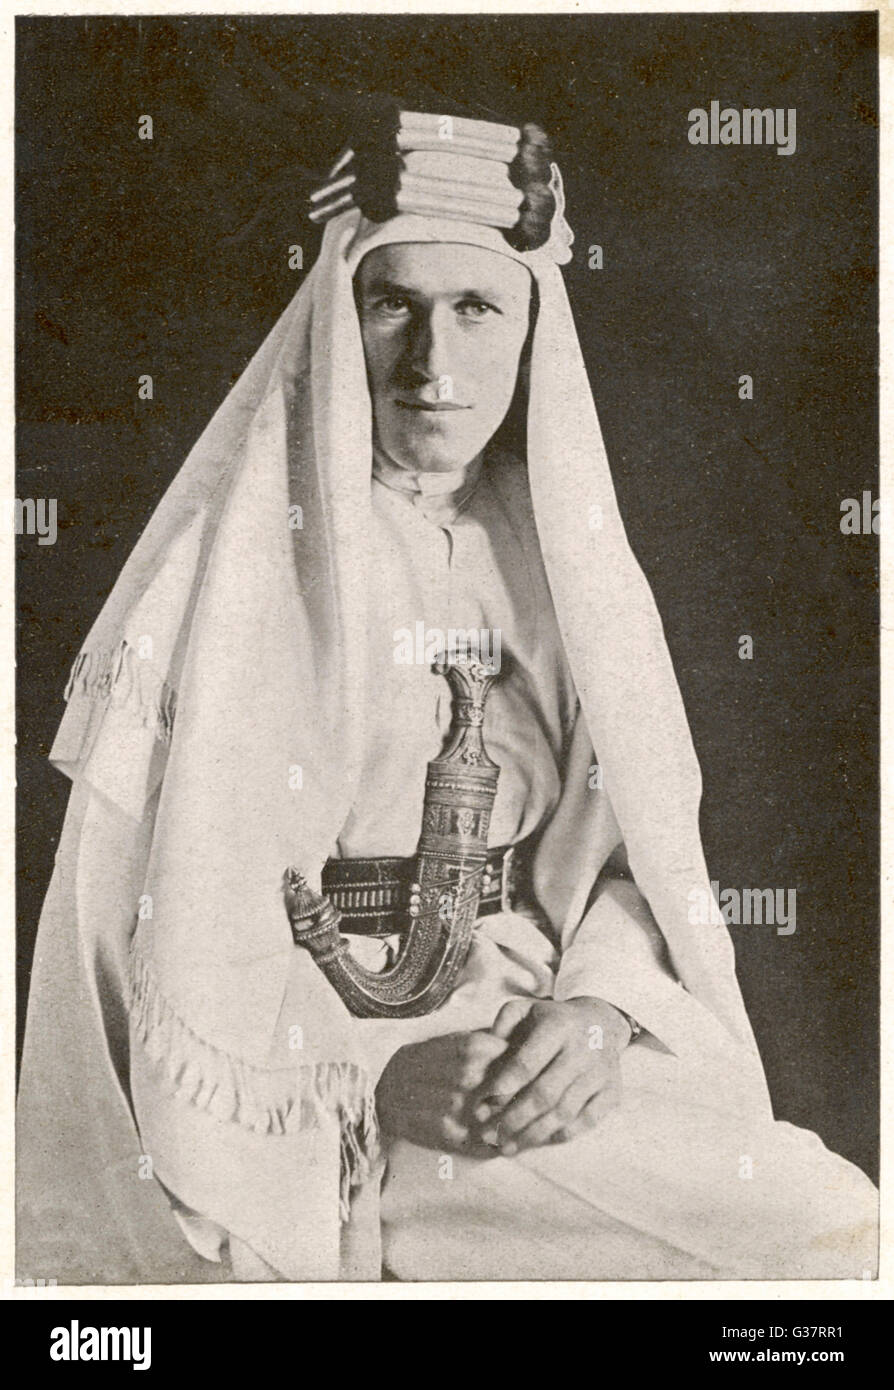 British archaeologist, soldier, intelligence officer and writer, Thomas Edward Lawrence (1888-1935), known as Lawrence of Arabia.       Date: circa 1918 Stock Photo